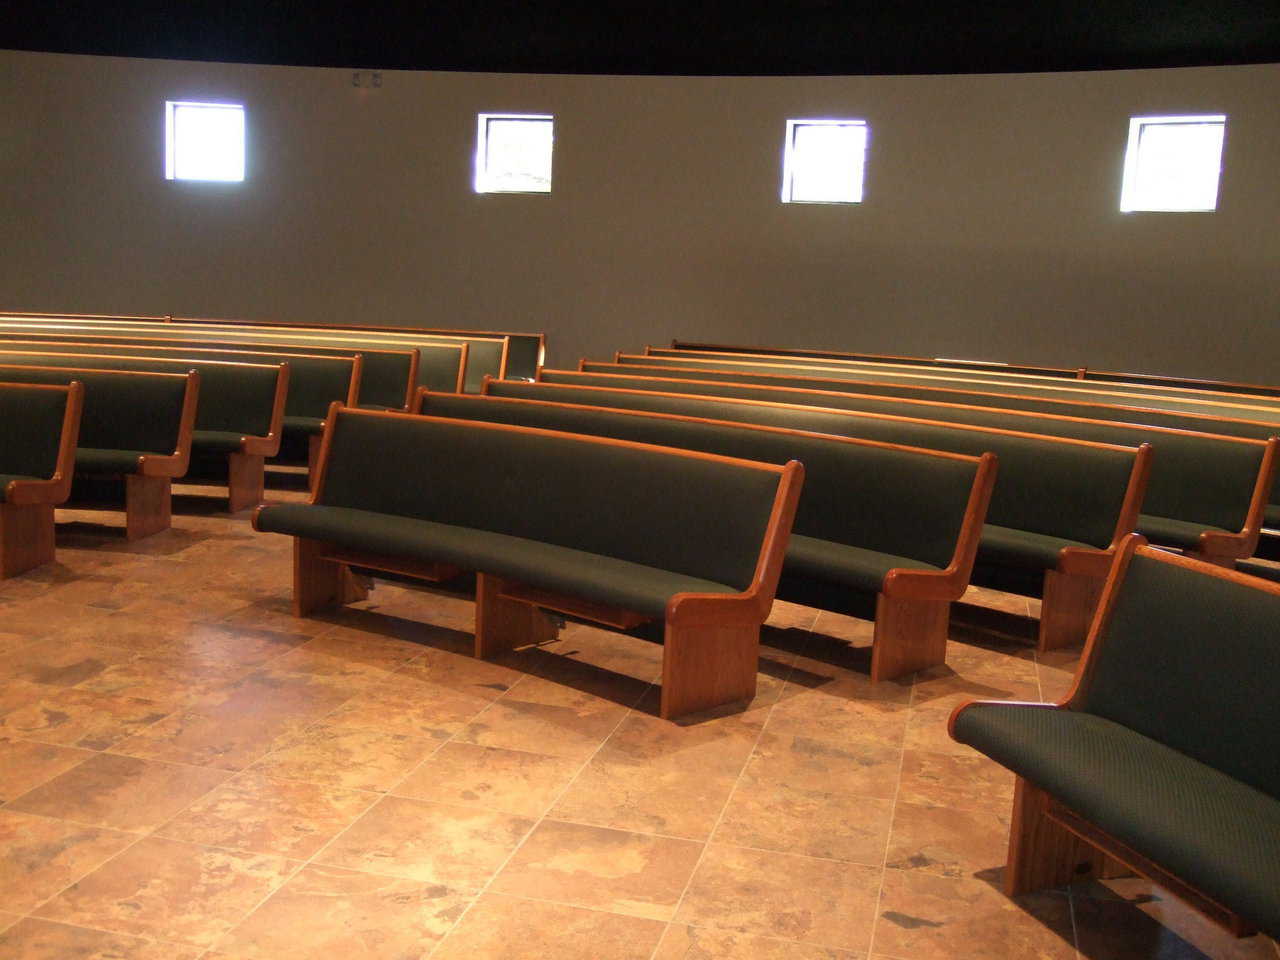 Comfortable seating — Curved wooden pews, upholstered with a cushiony soft green fabric, help create an intimate atmosphere while providing ample seating.